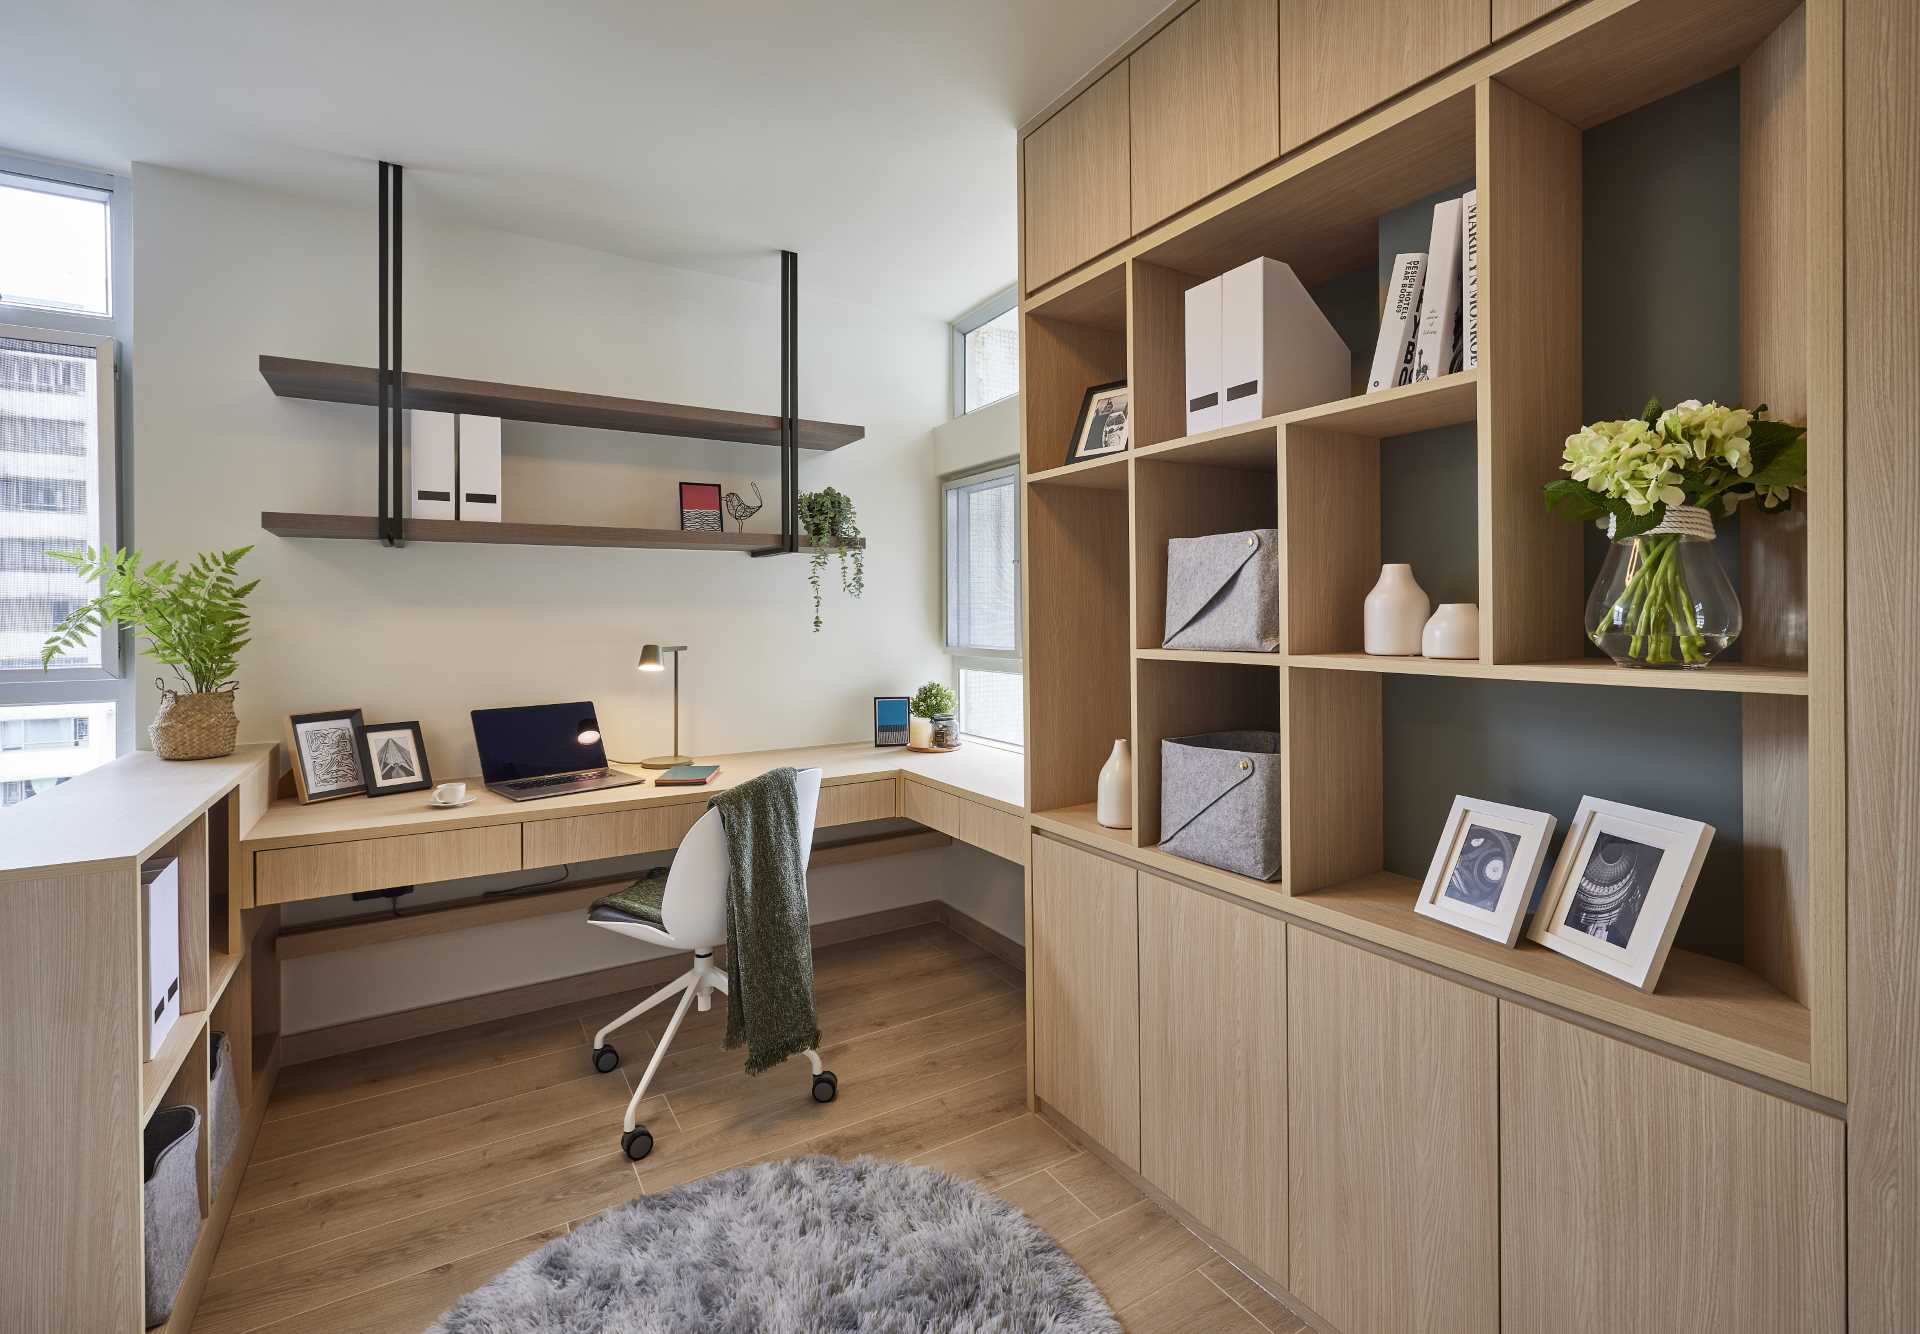 This modern built-in home office includes shelving mounted above the desk, a low cabinet on the left, and a tall cabinet with shelving on the right.